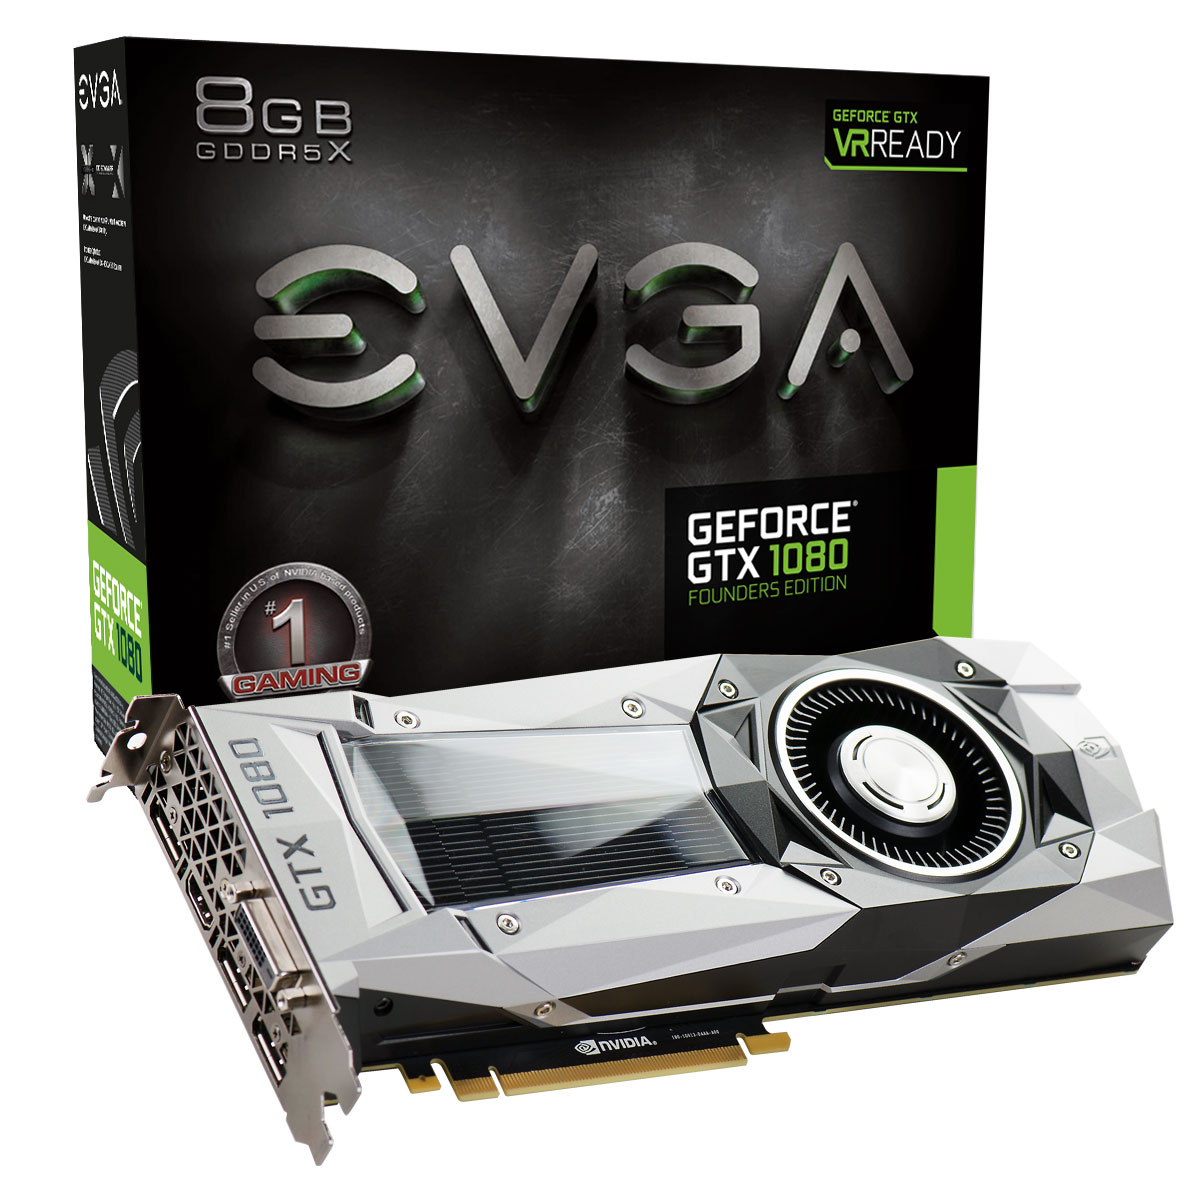 Media asset in full size related to 3dfxzone.it news item entitled as follows: EVGA annuncia cinque video card GeForce GTX 1080, reference e non | Image Name: news24333_EVGA-GeForce-GTX-1080-FOUNDERS-EDITION_1.jpg